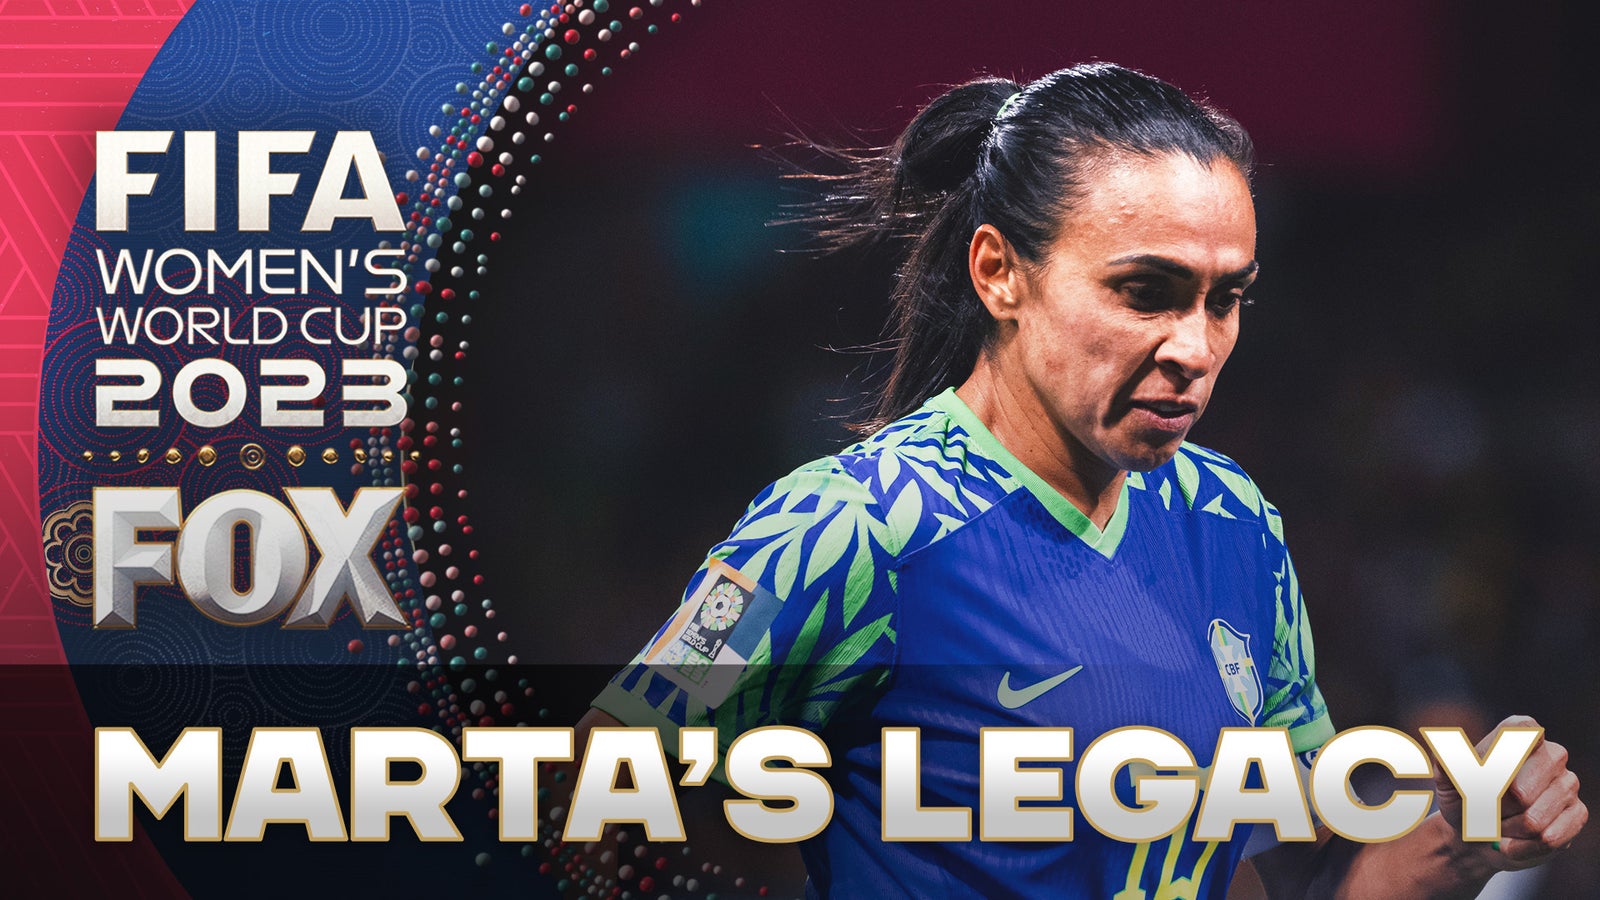 "World Cup Tonight" crew reflects on Marta's legacy 